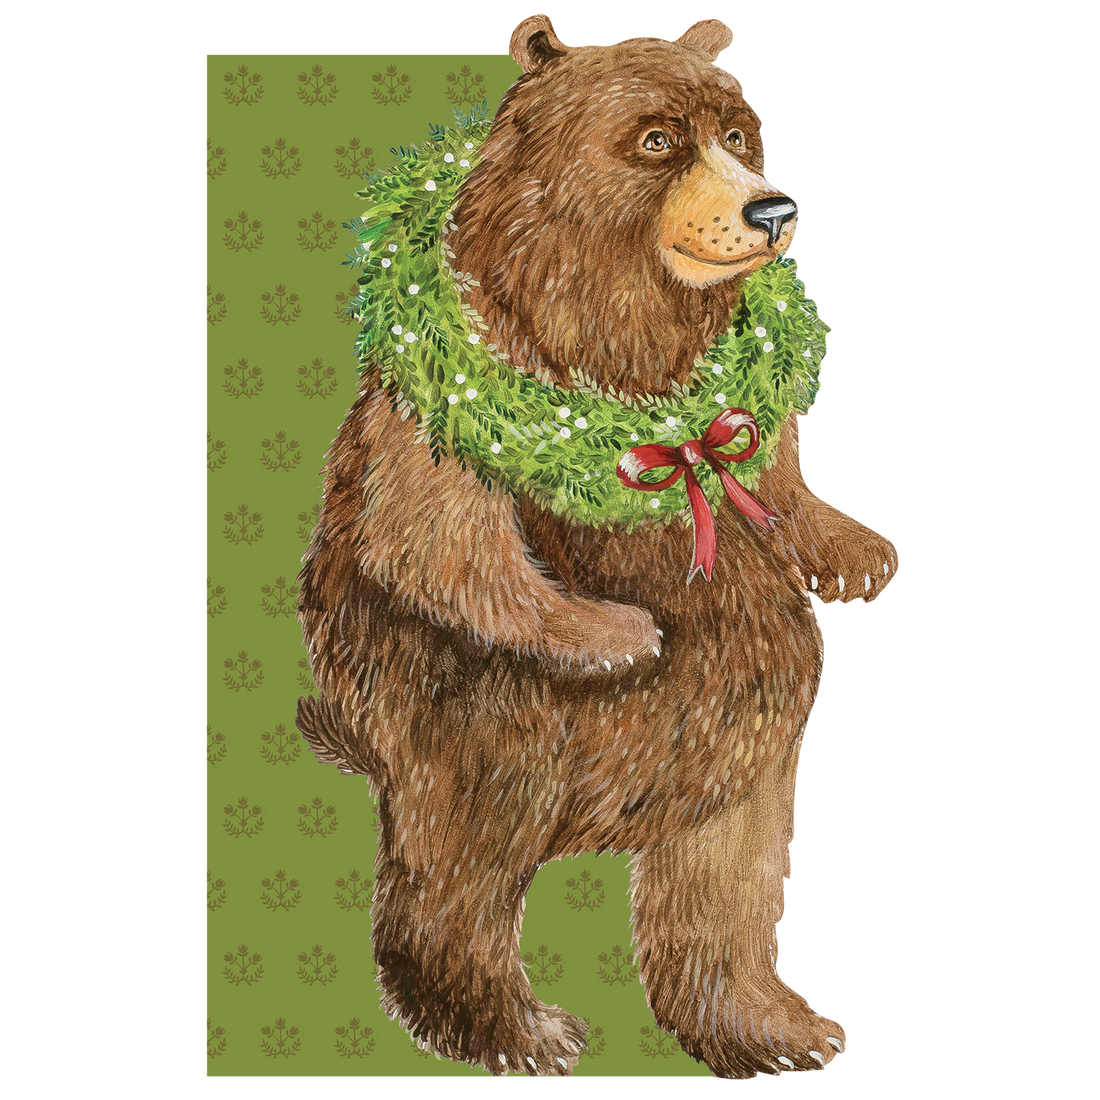 A die-cut whimsical illustration of a brown bear standing on hind legs wearing a green wreath with a red bow around their neck, over a green patterned background where the bear extends beyond the rectangular edges of the card.